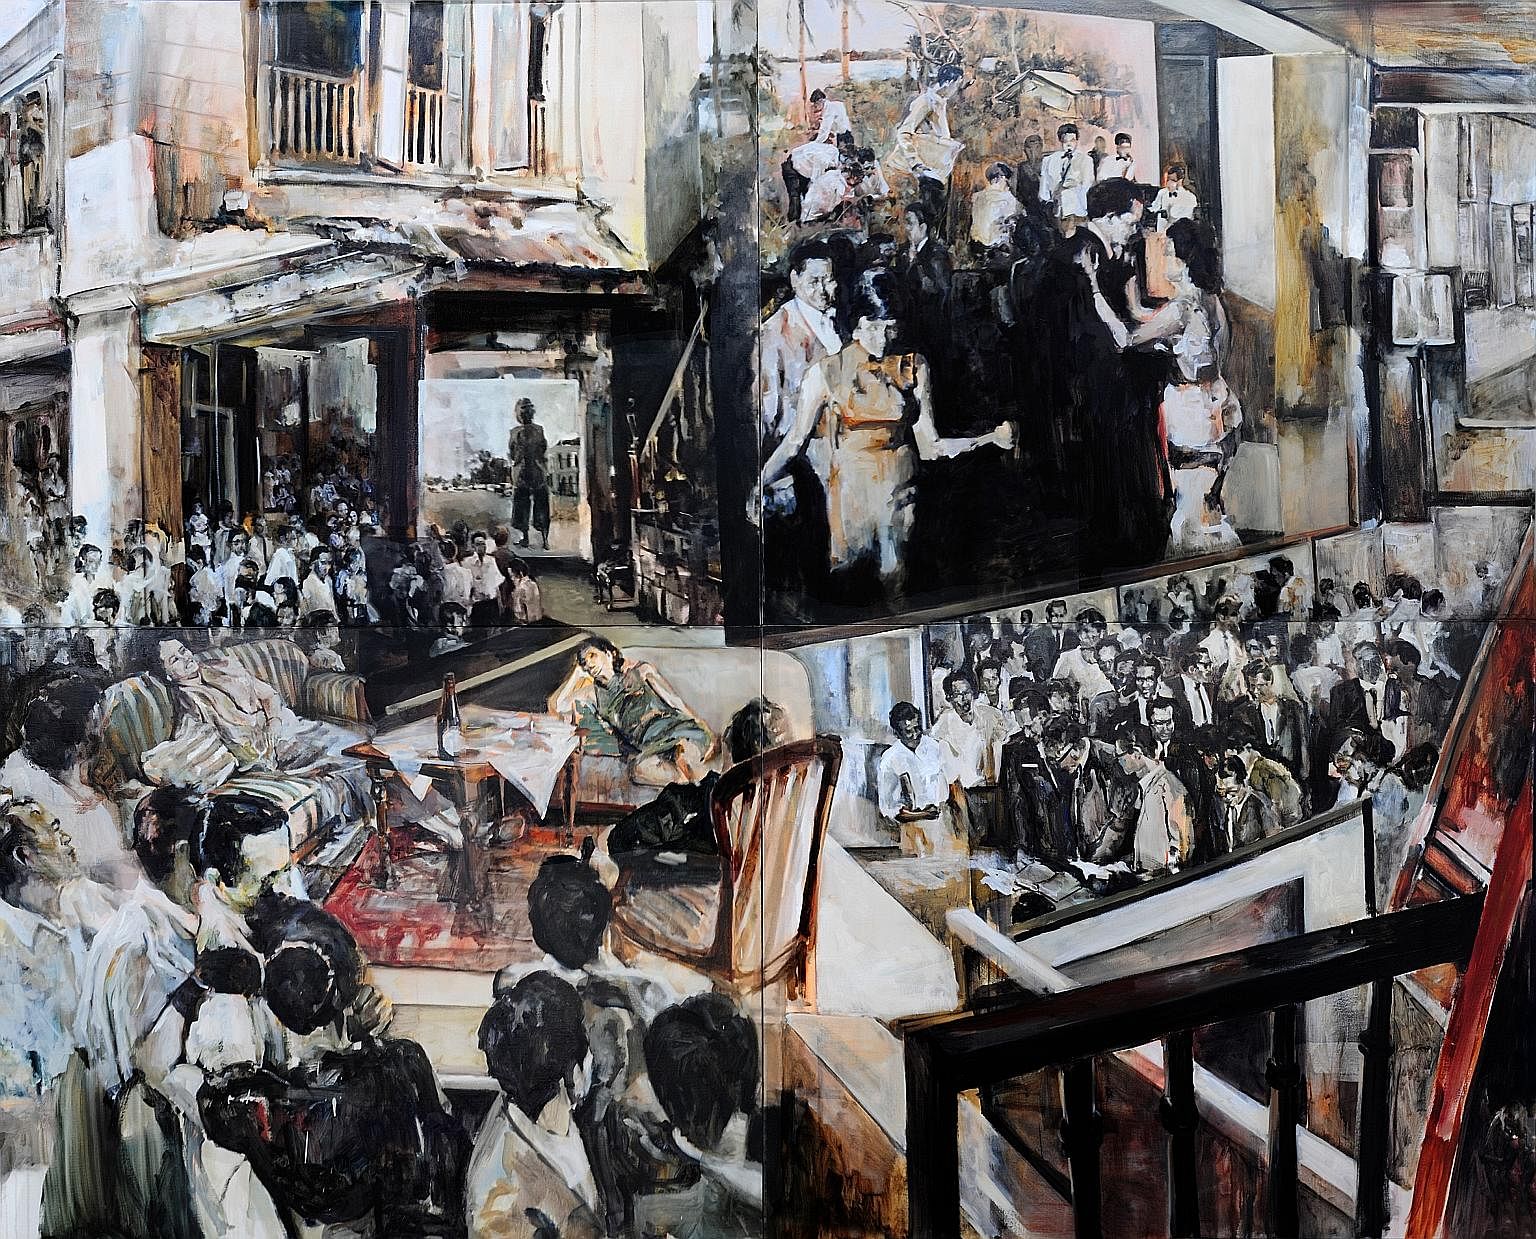 The Vernissage by Hilmi Johandi (above), in The City Book.